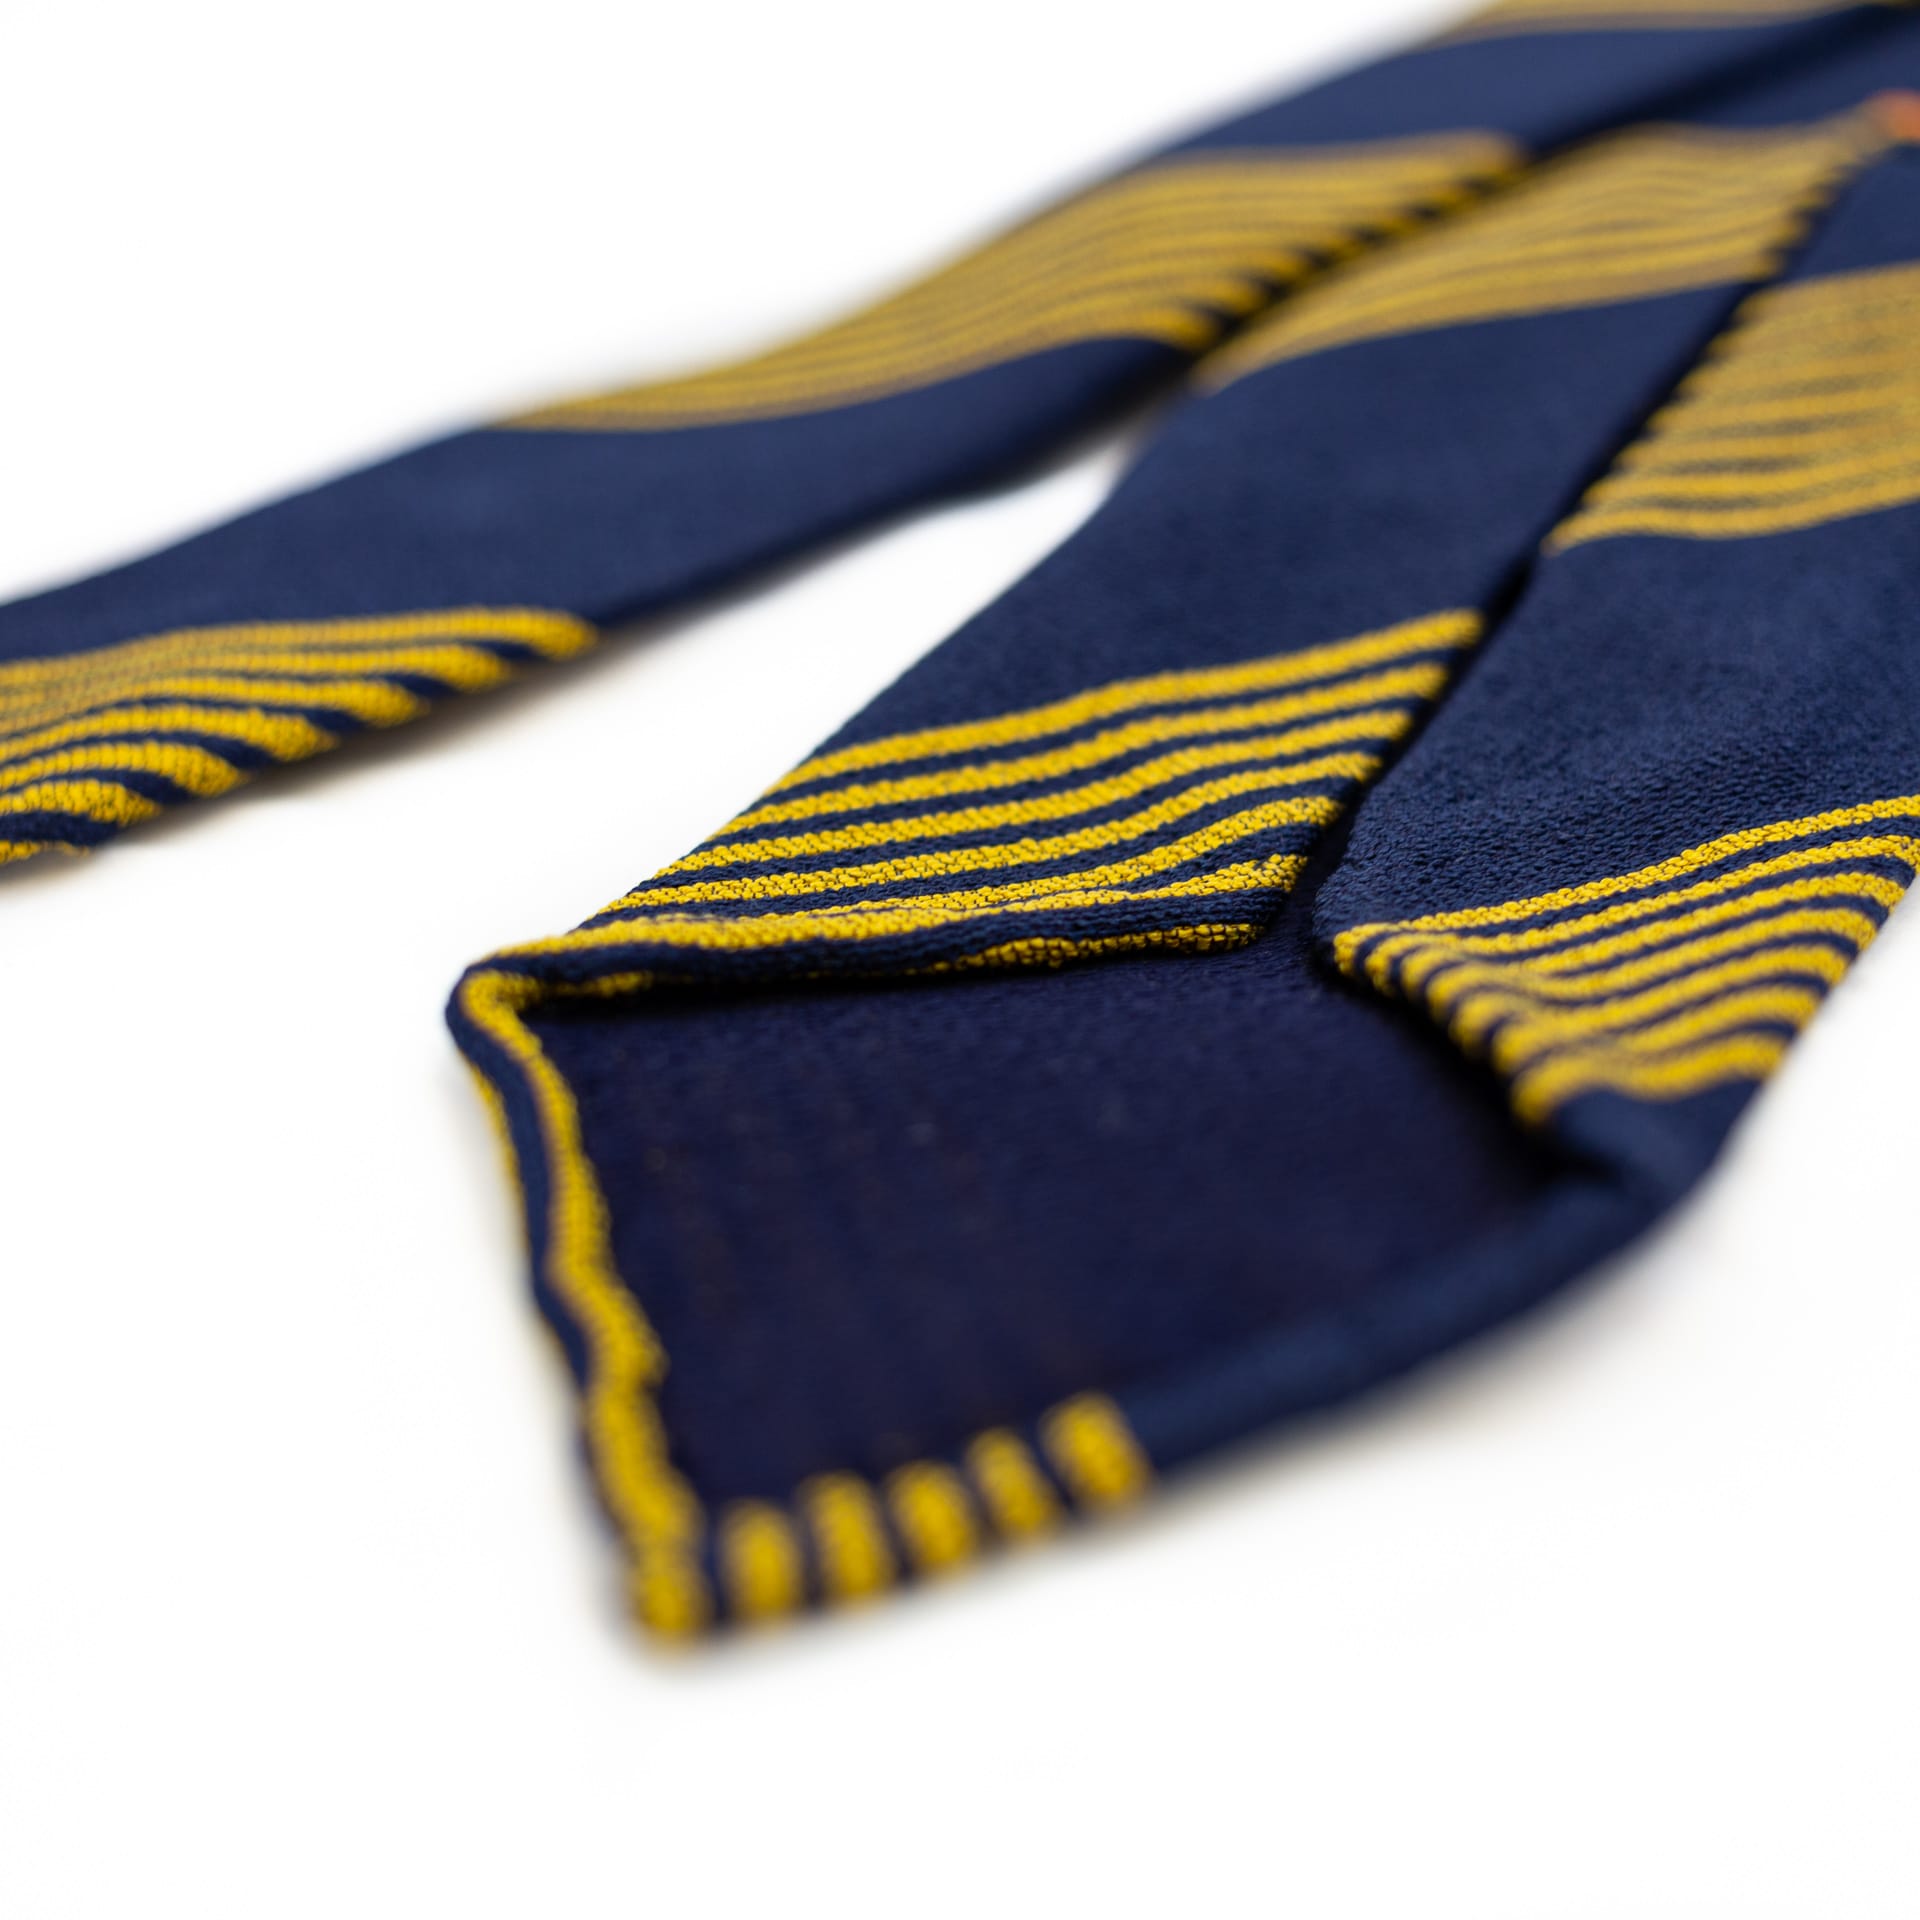 DLA 5-fold navy and yellow striped tie details